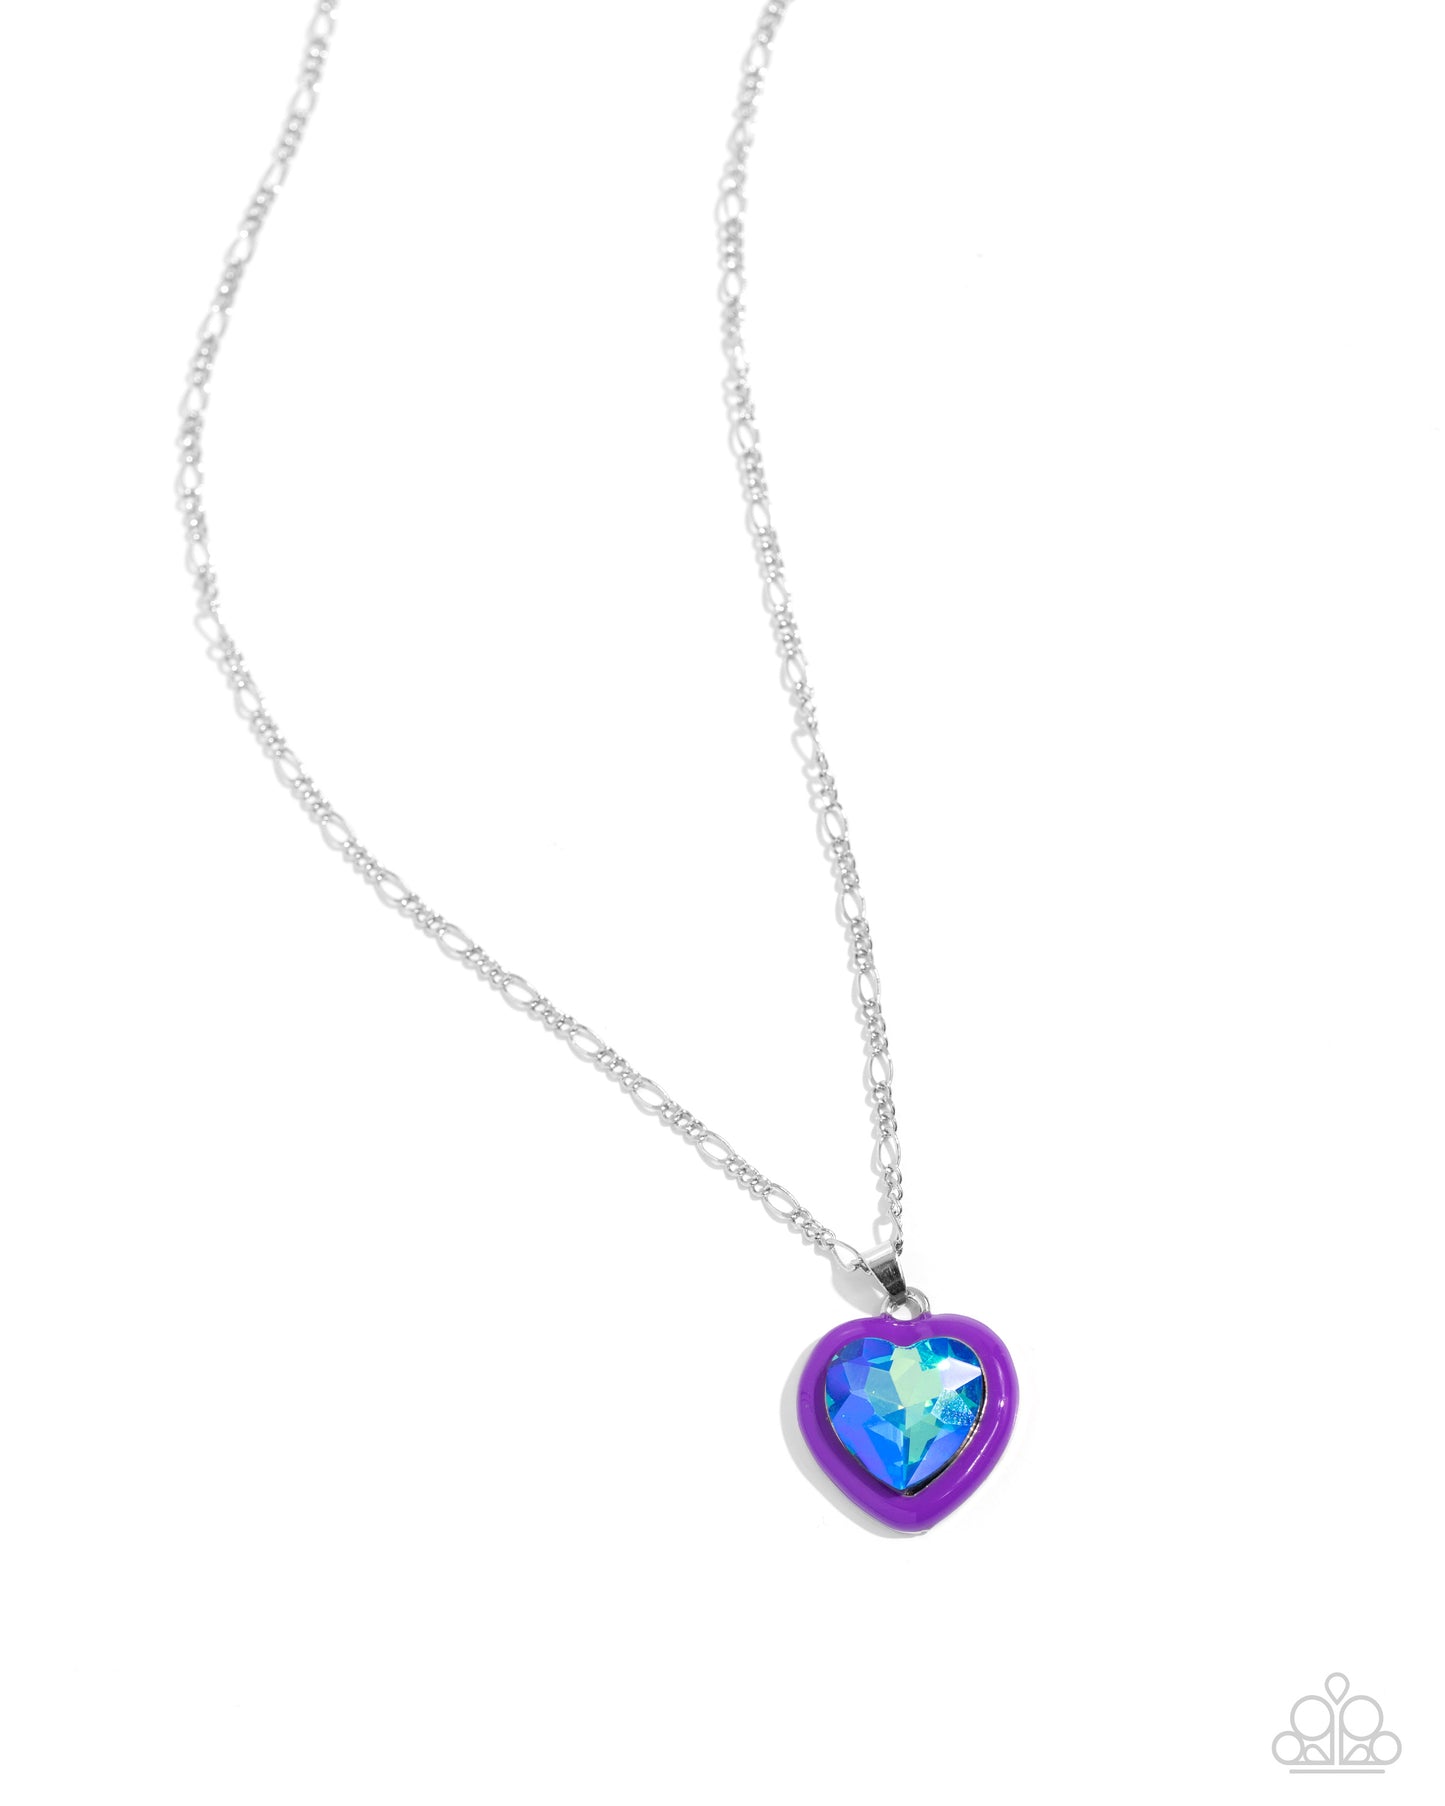 <p>Pressed in a border of purple paint, an oversized UV shimmery heart gem is flirtatiously attached to a silver figaro chain, resulting in a romantic-inspired display. Features an adjustable clasp closure.</p> <p><i> Sold as one individual necklace. Includes one pair of matching earrings. </i></p> <br><b> Get The Complete Look! </b> <br>Earring: "Heartfelt Haute - Purple" (Sold Separately)<br>